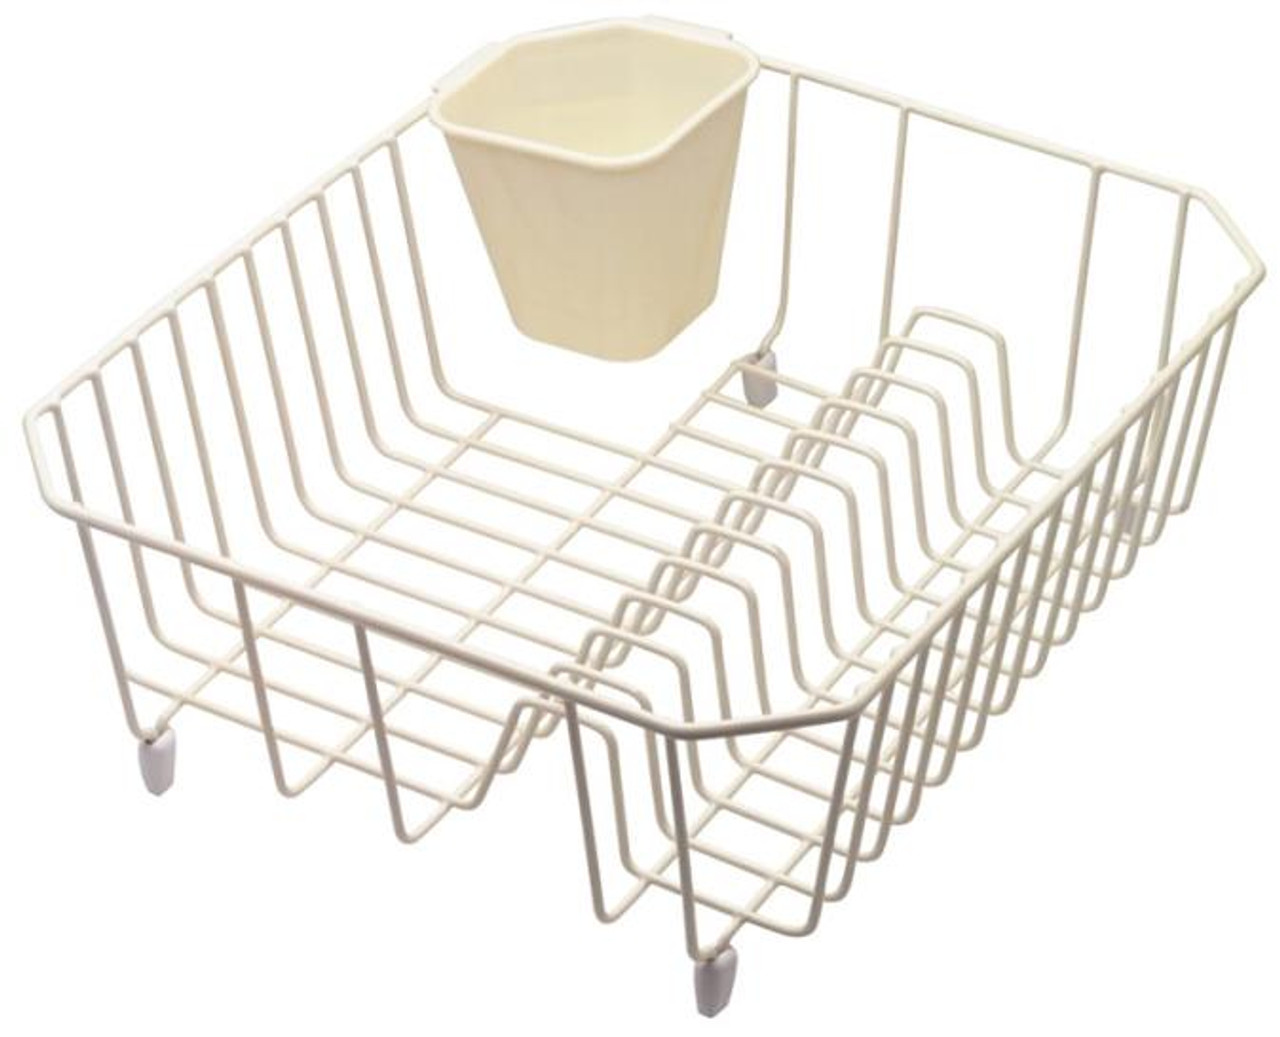 Rubbermaid 12.49 In. x 14.31 In. White Wire Sink Dish Drainer